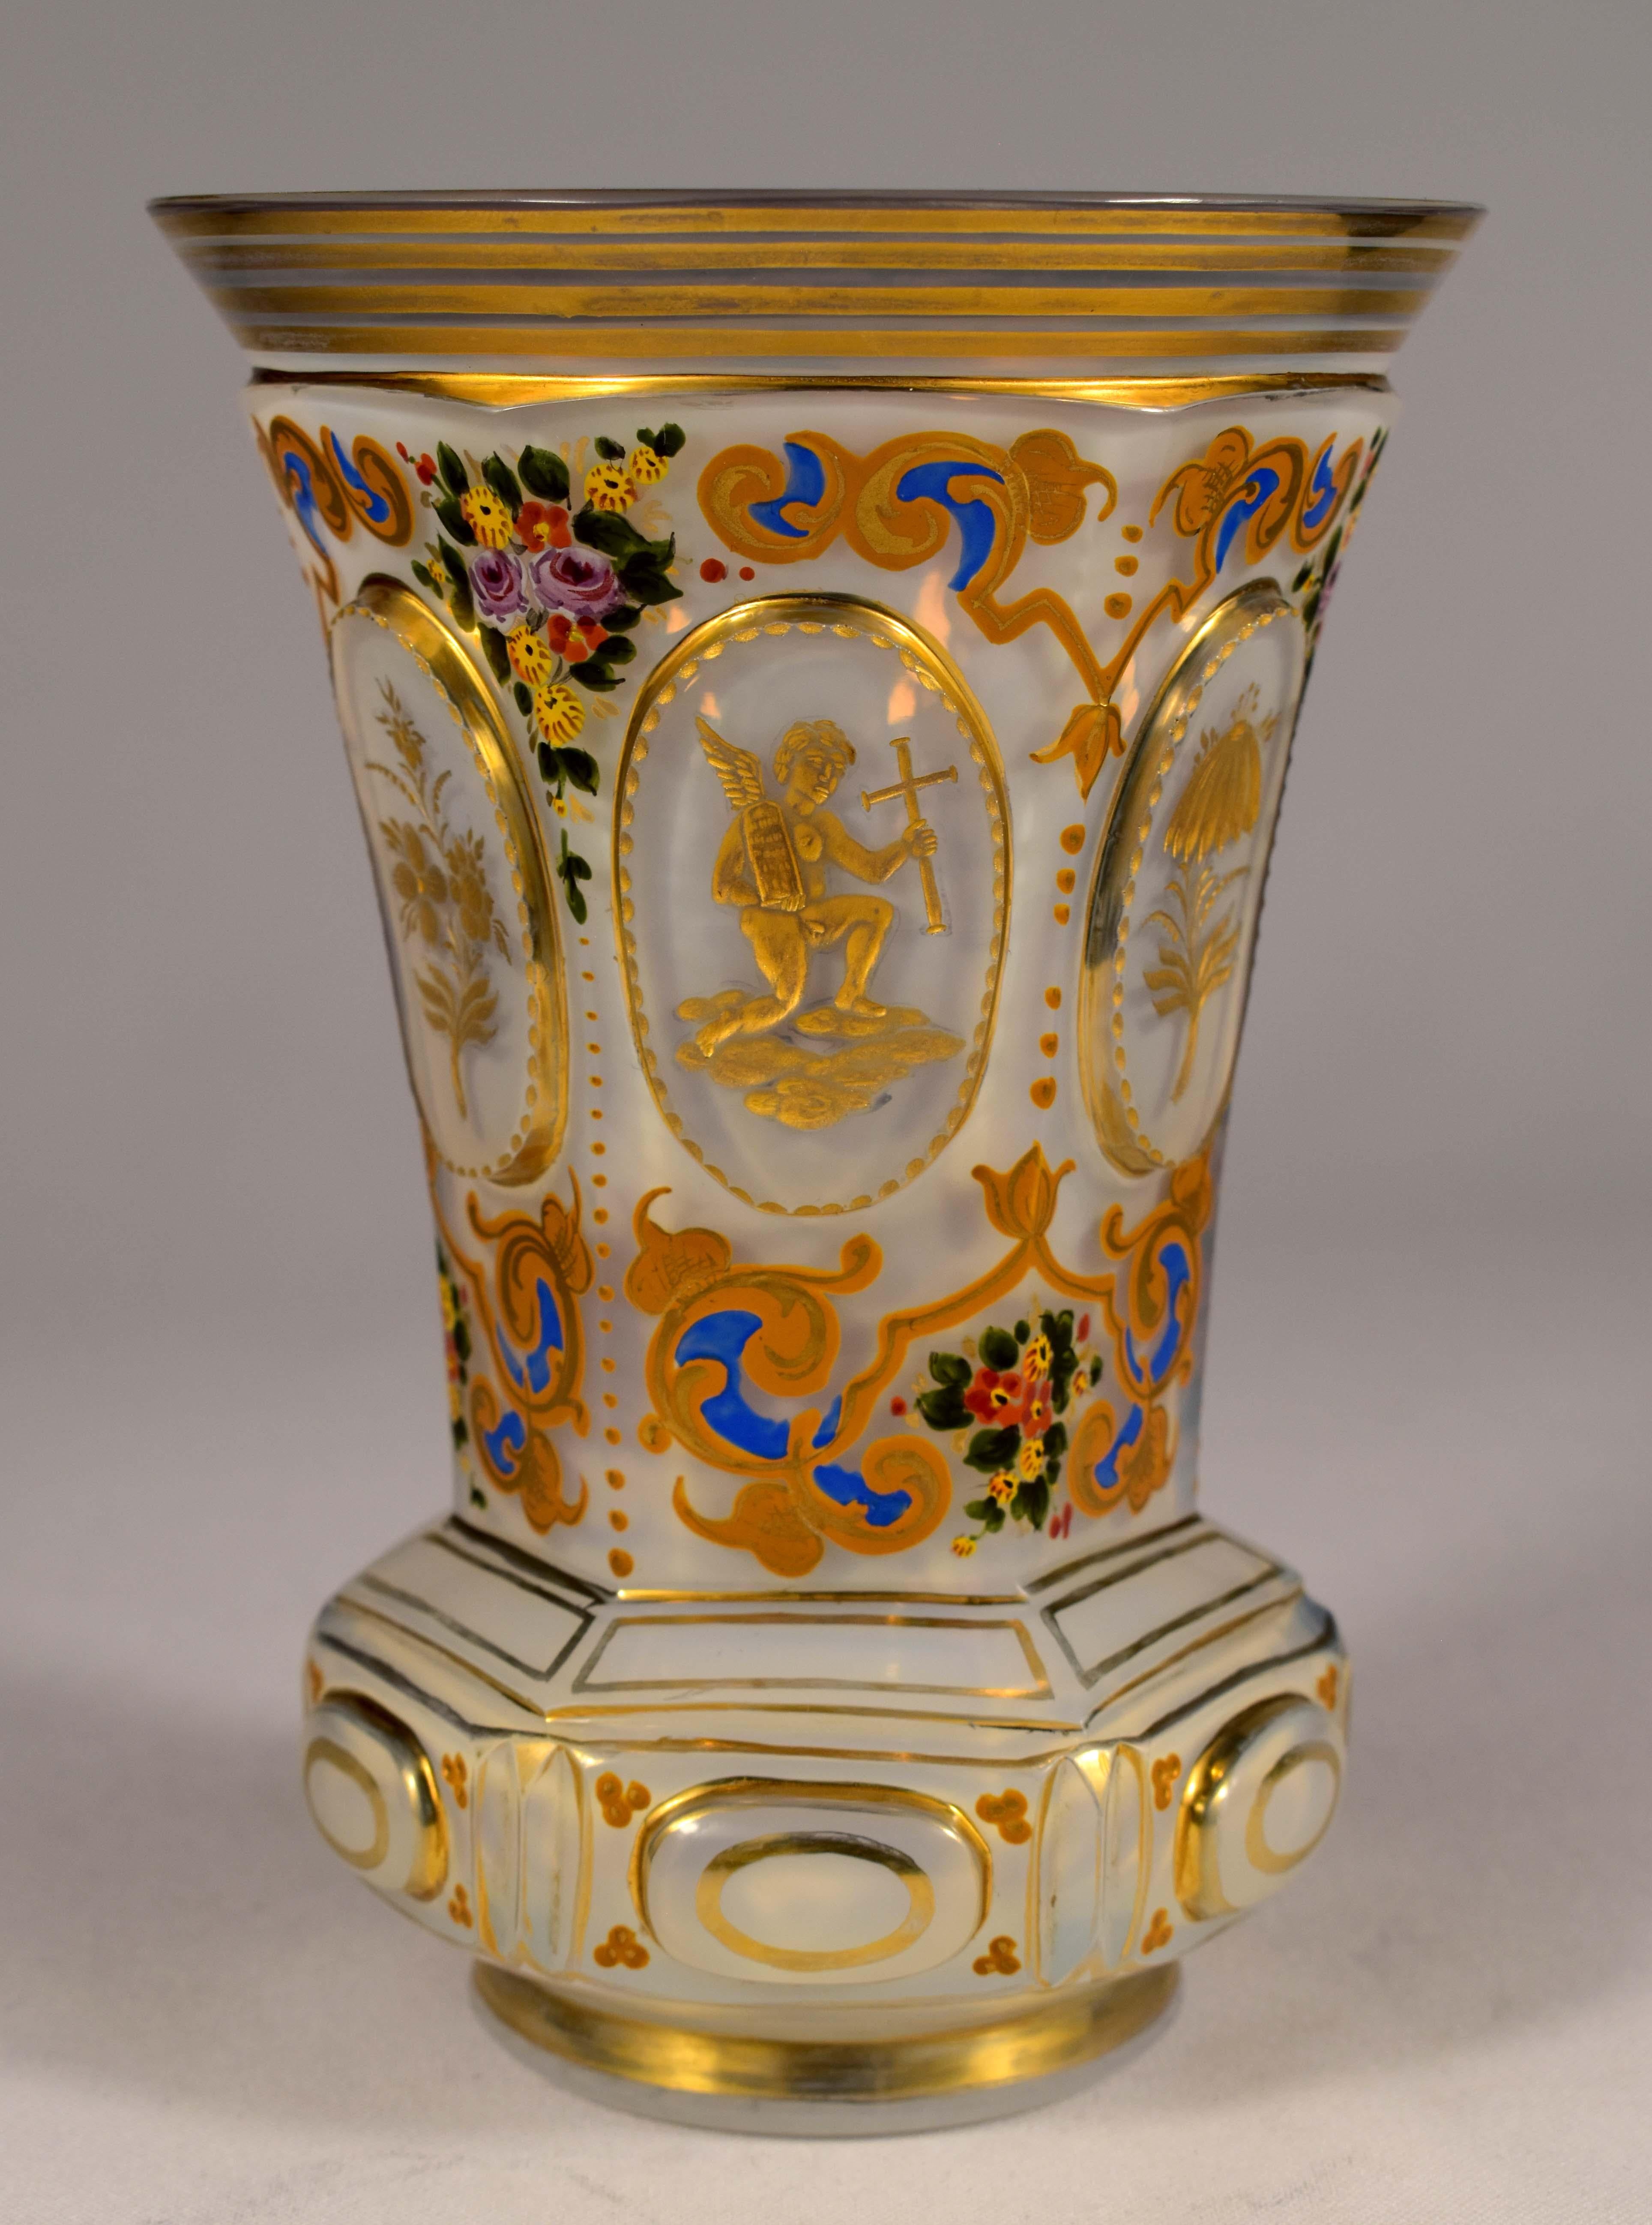 The goblet and plate are beautifully cut and painted and gilded engraving. Cut six medallions. engraved floral and gilded decor in three medallions, in the three medallions are engraved and gilded cupids with symbolism, - faith - hope – love. A